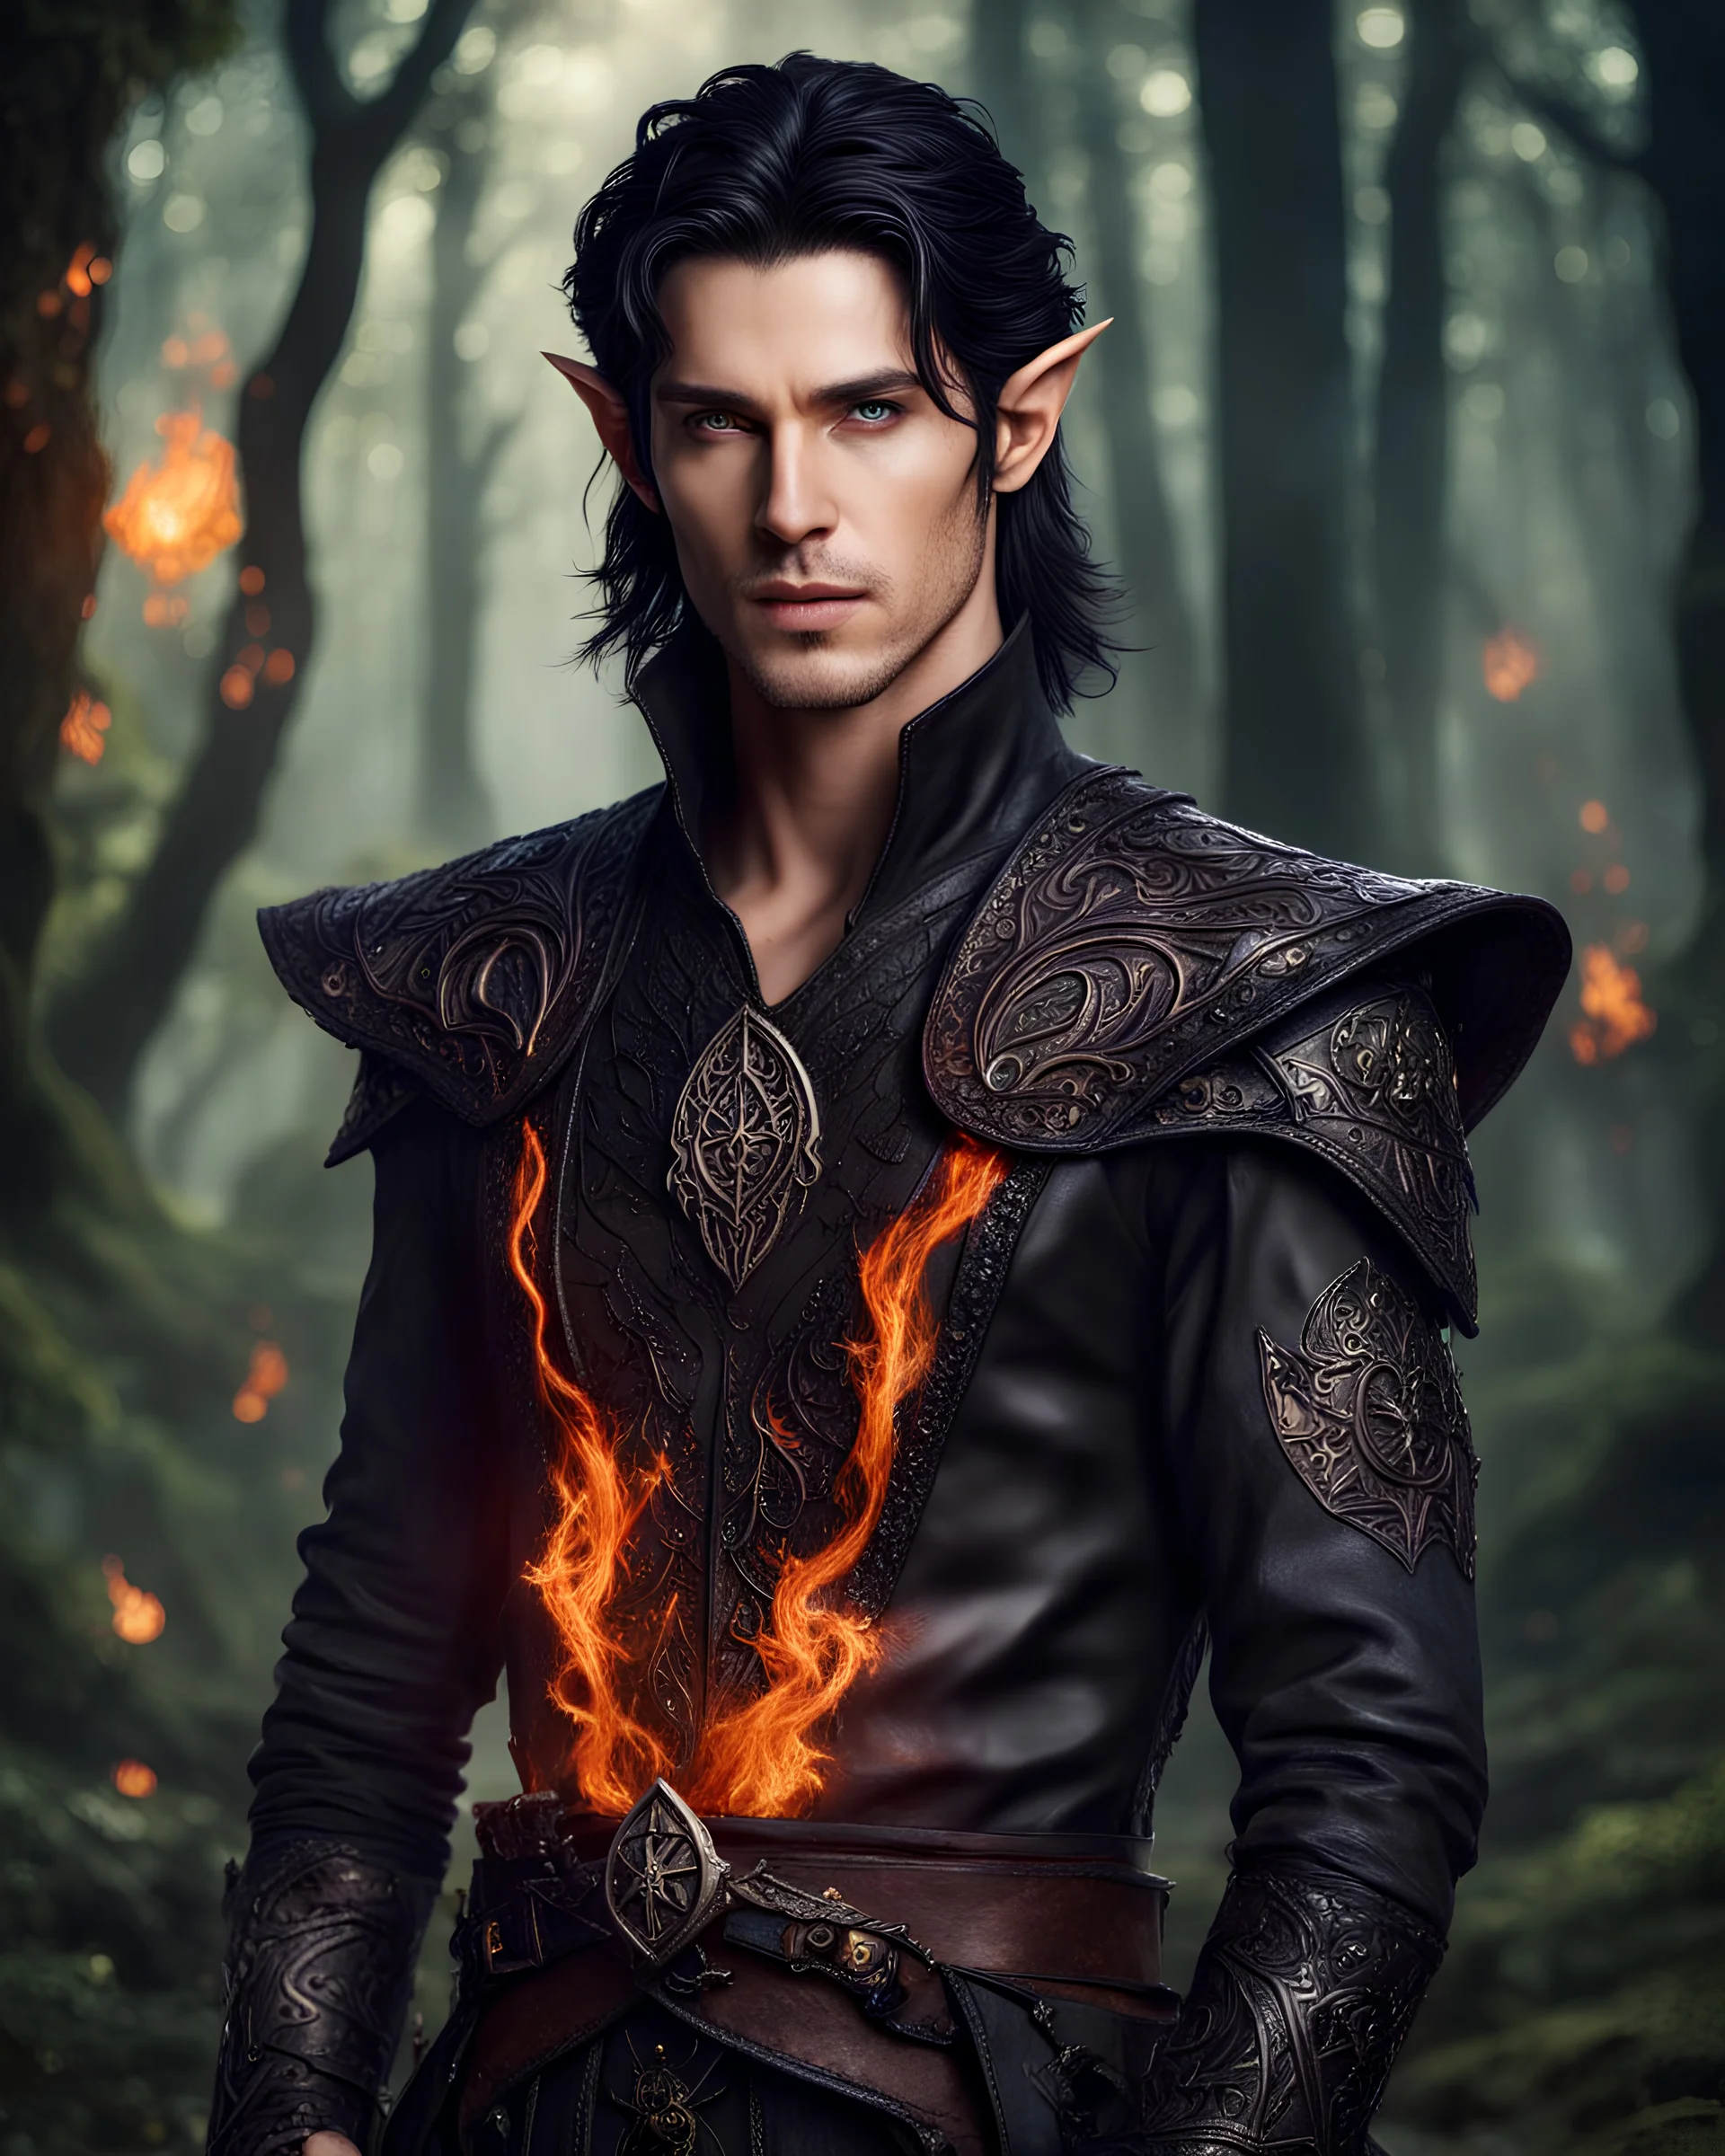 Handsome Fantasy male elf mage, with black hair, emerald green eyes, intricate fiery mystical symbols on his leather armor, an ancient forbidding dark forest in the background, detailed, high resolution, fantasy portrait, photo shooting